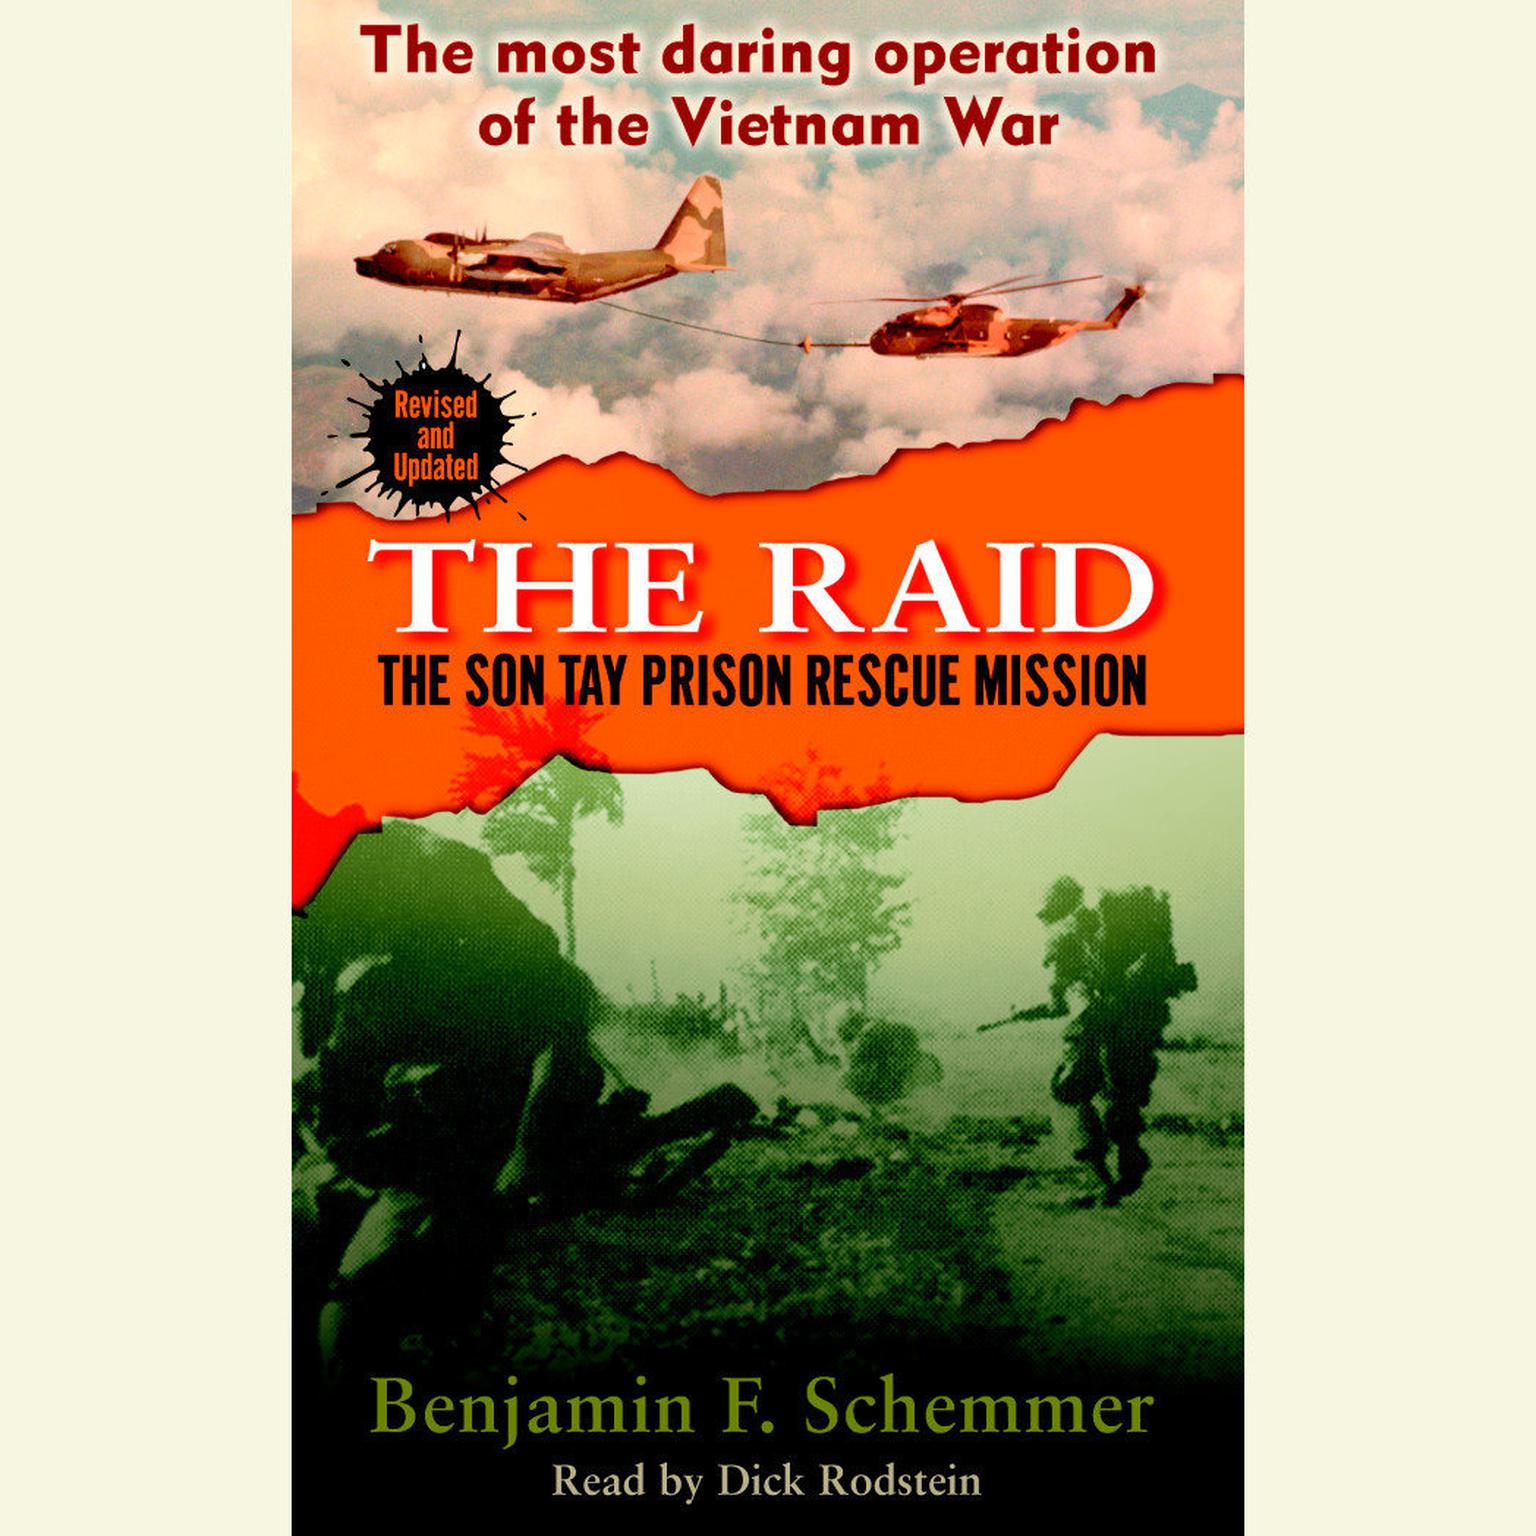 The Raid (Abridged): The Son Tay Prison Rescue Mission Audiobook, by Benjamin F. Schemmer